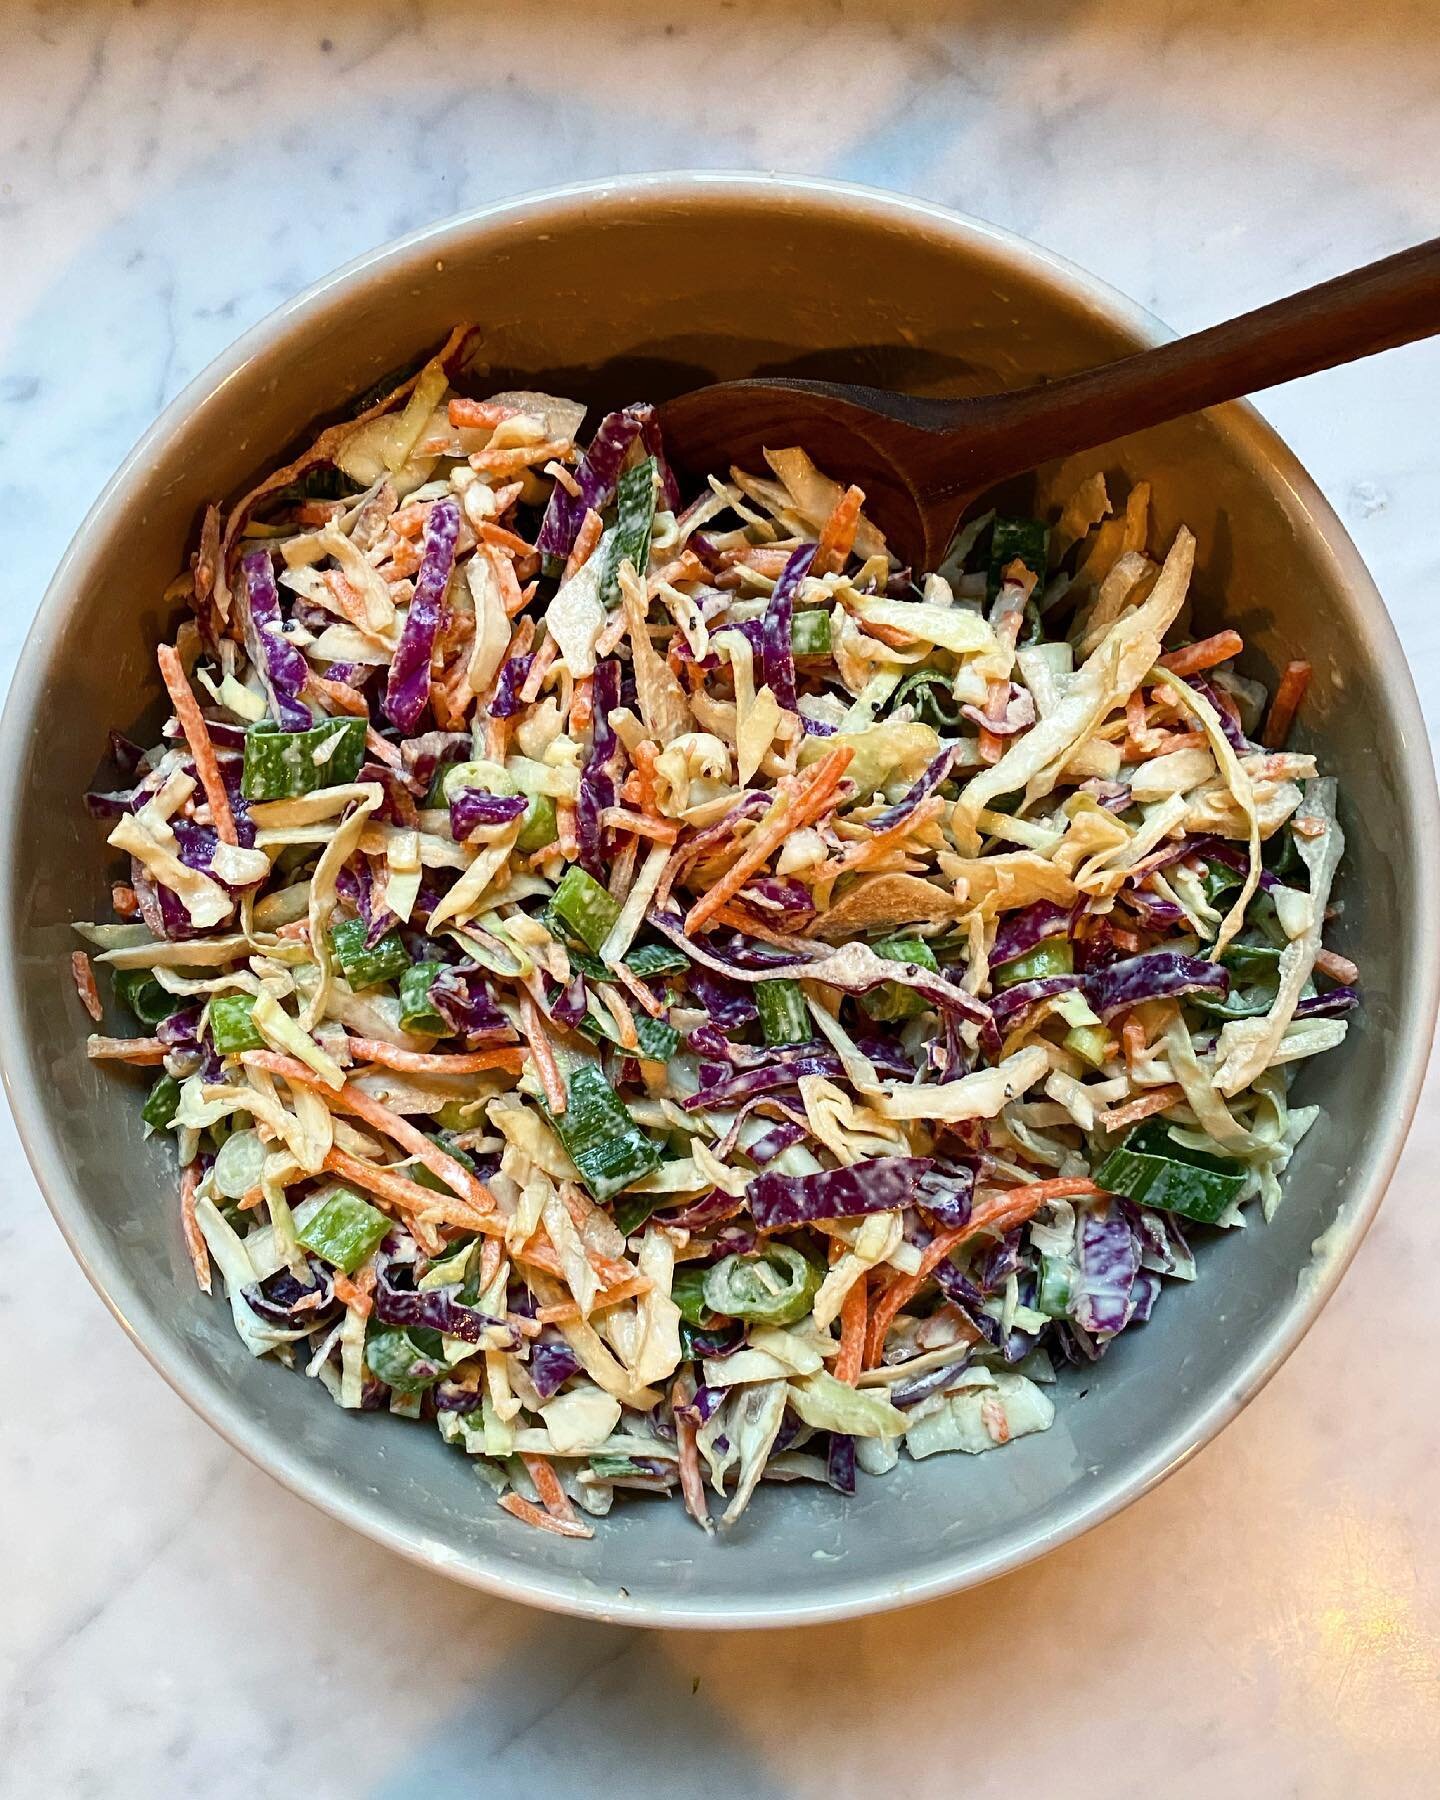 Slaw doesn&rsquo;t need mayo to be good. This one has a healthier dressing of @mightysesameco tahini, fresh lemon juice and Dijon
#eatmoreplants #cookityourself